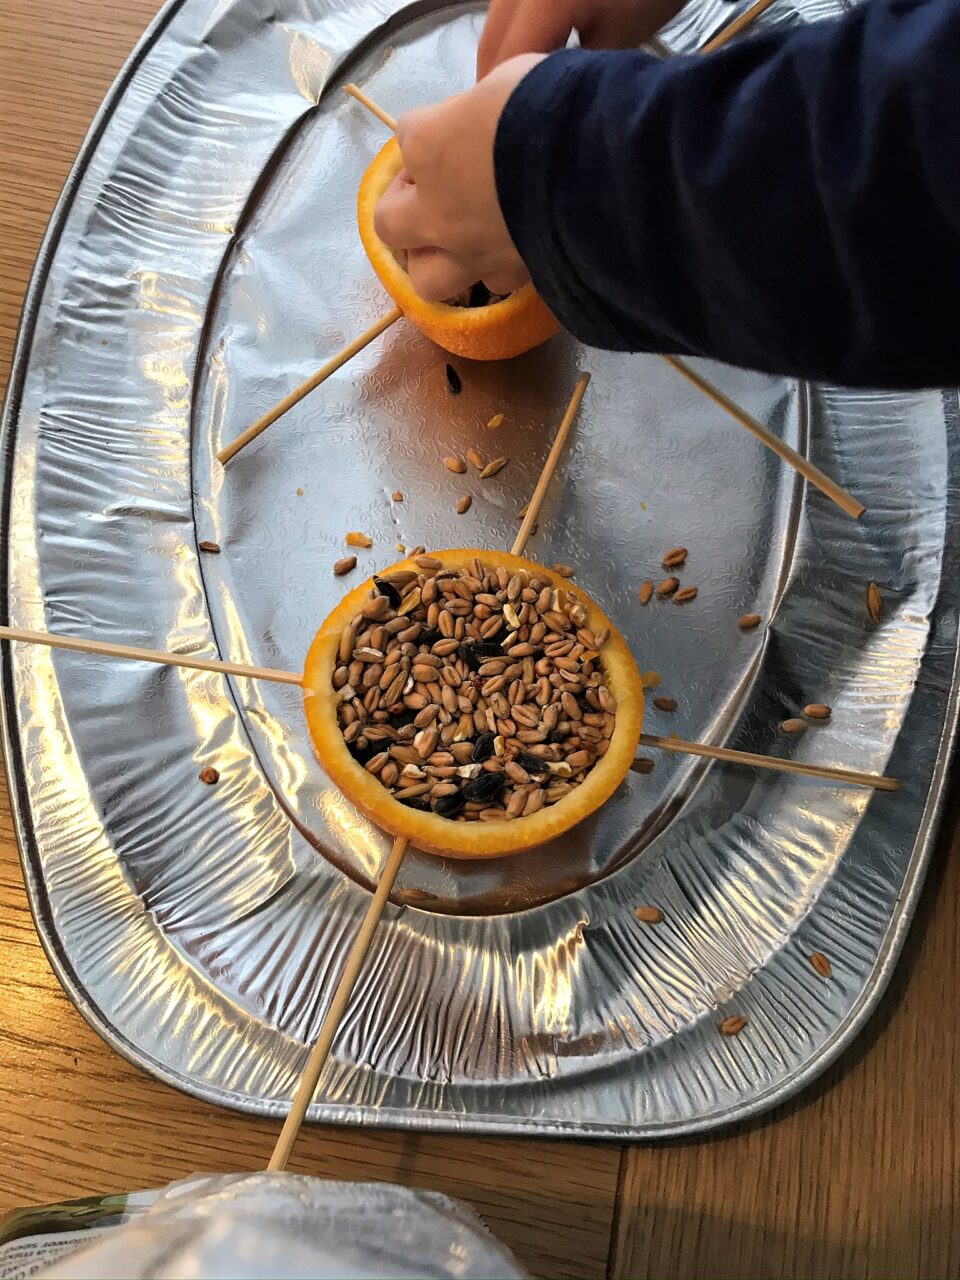 the oranges being filled with the seed